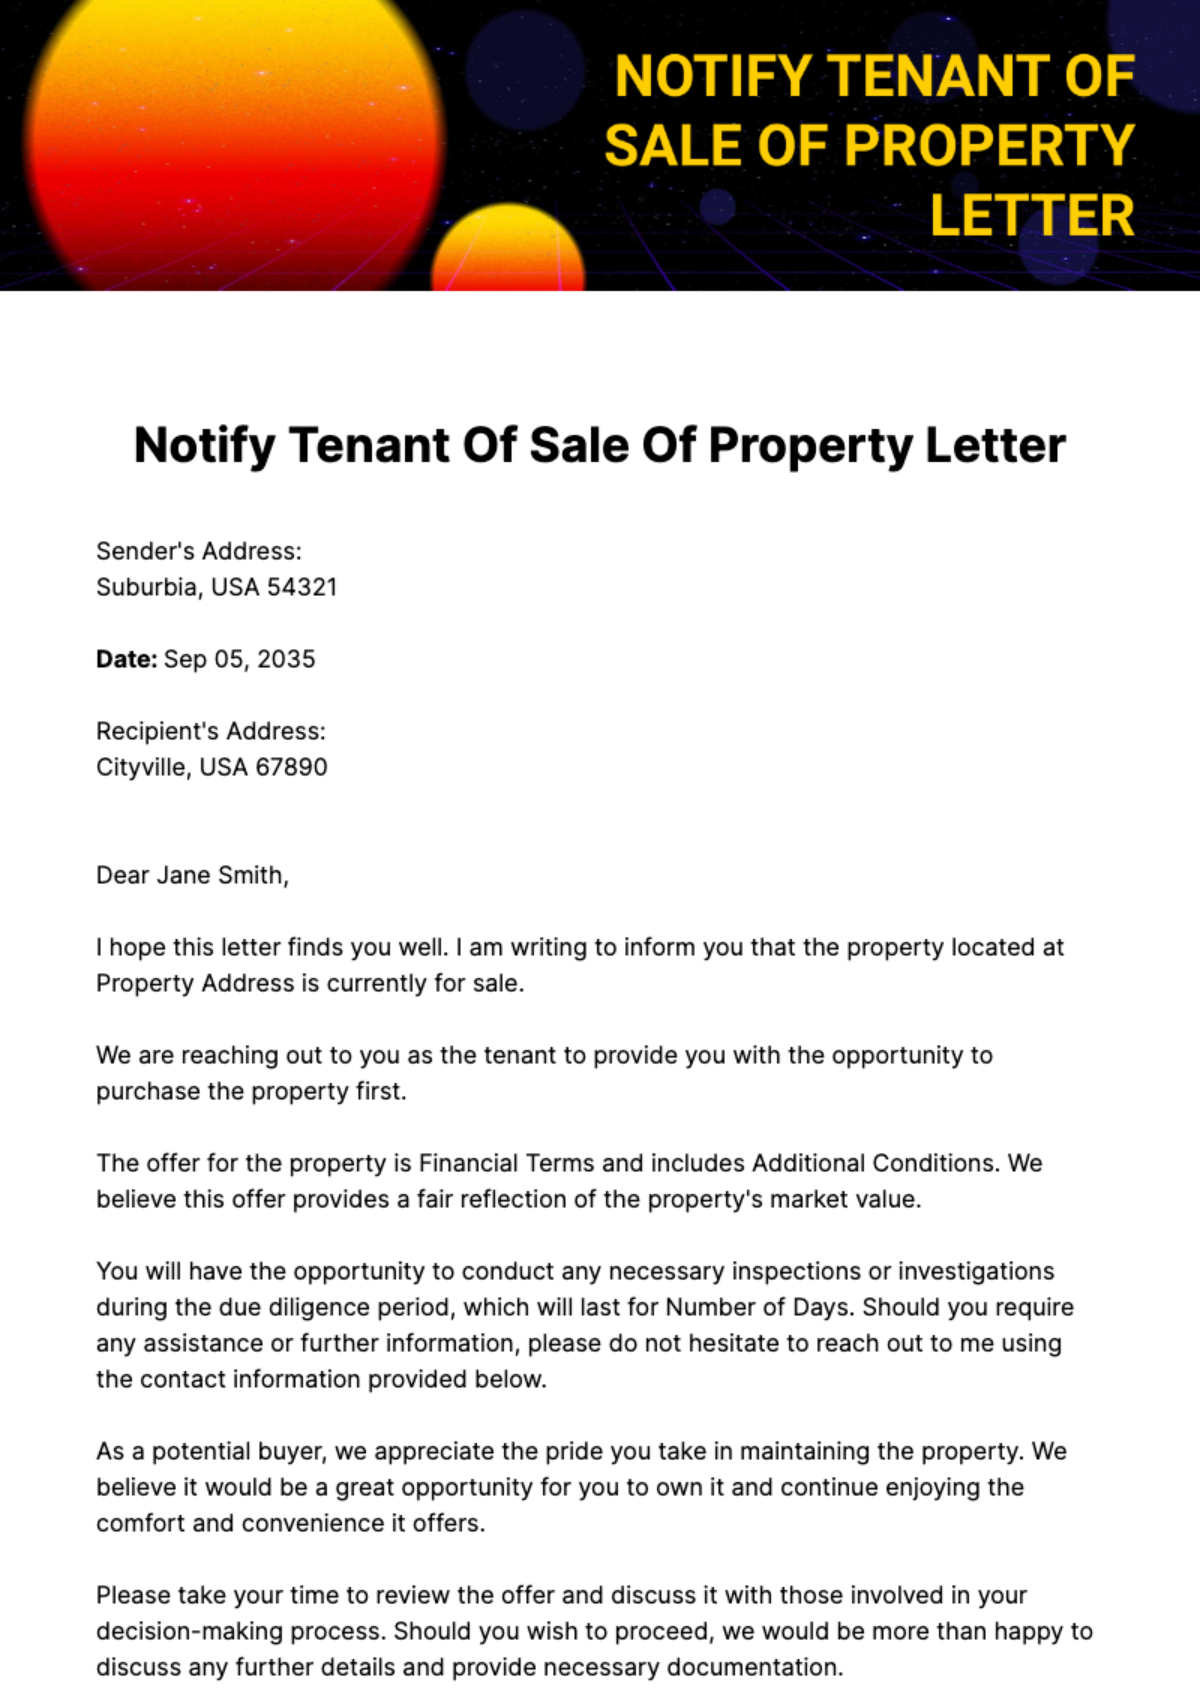 Notify Tenant Of Sale Of Property Letter Template